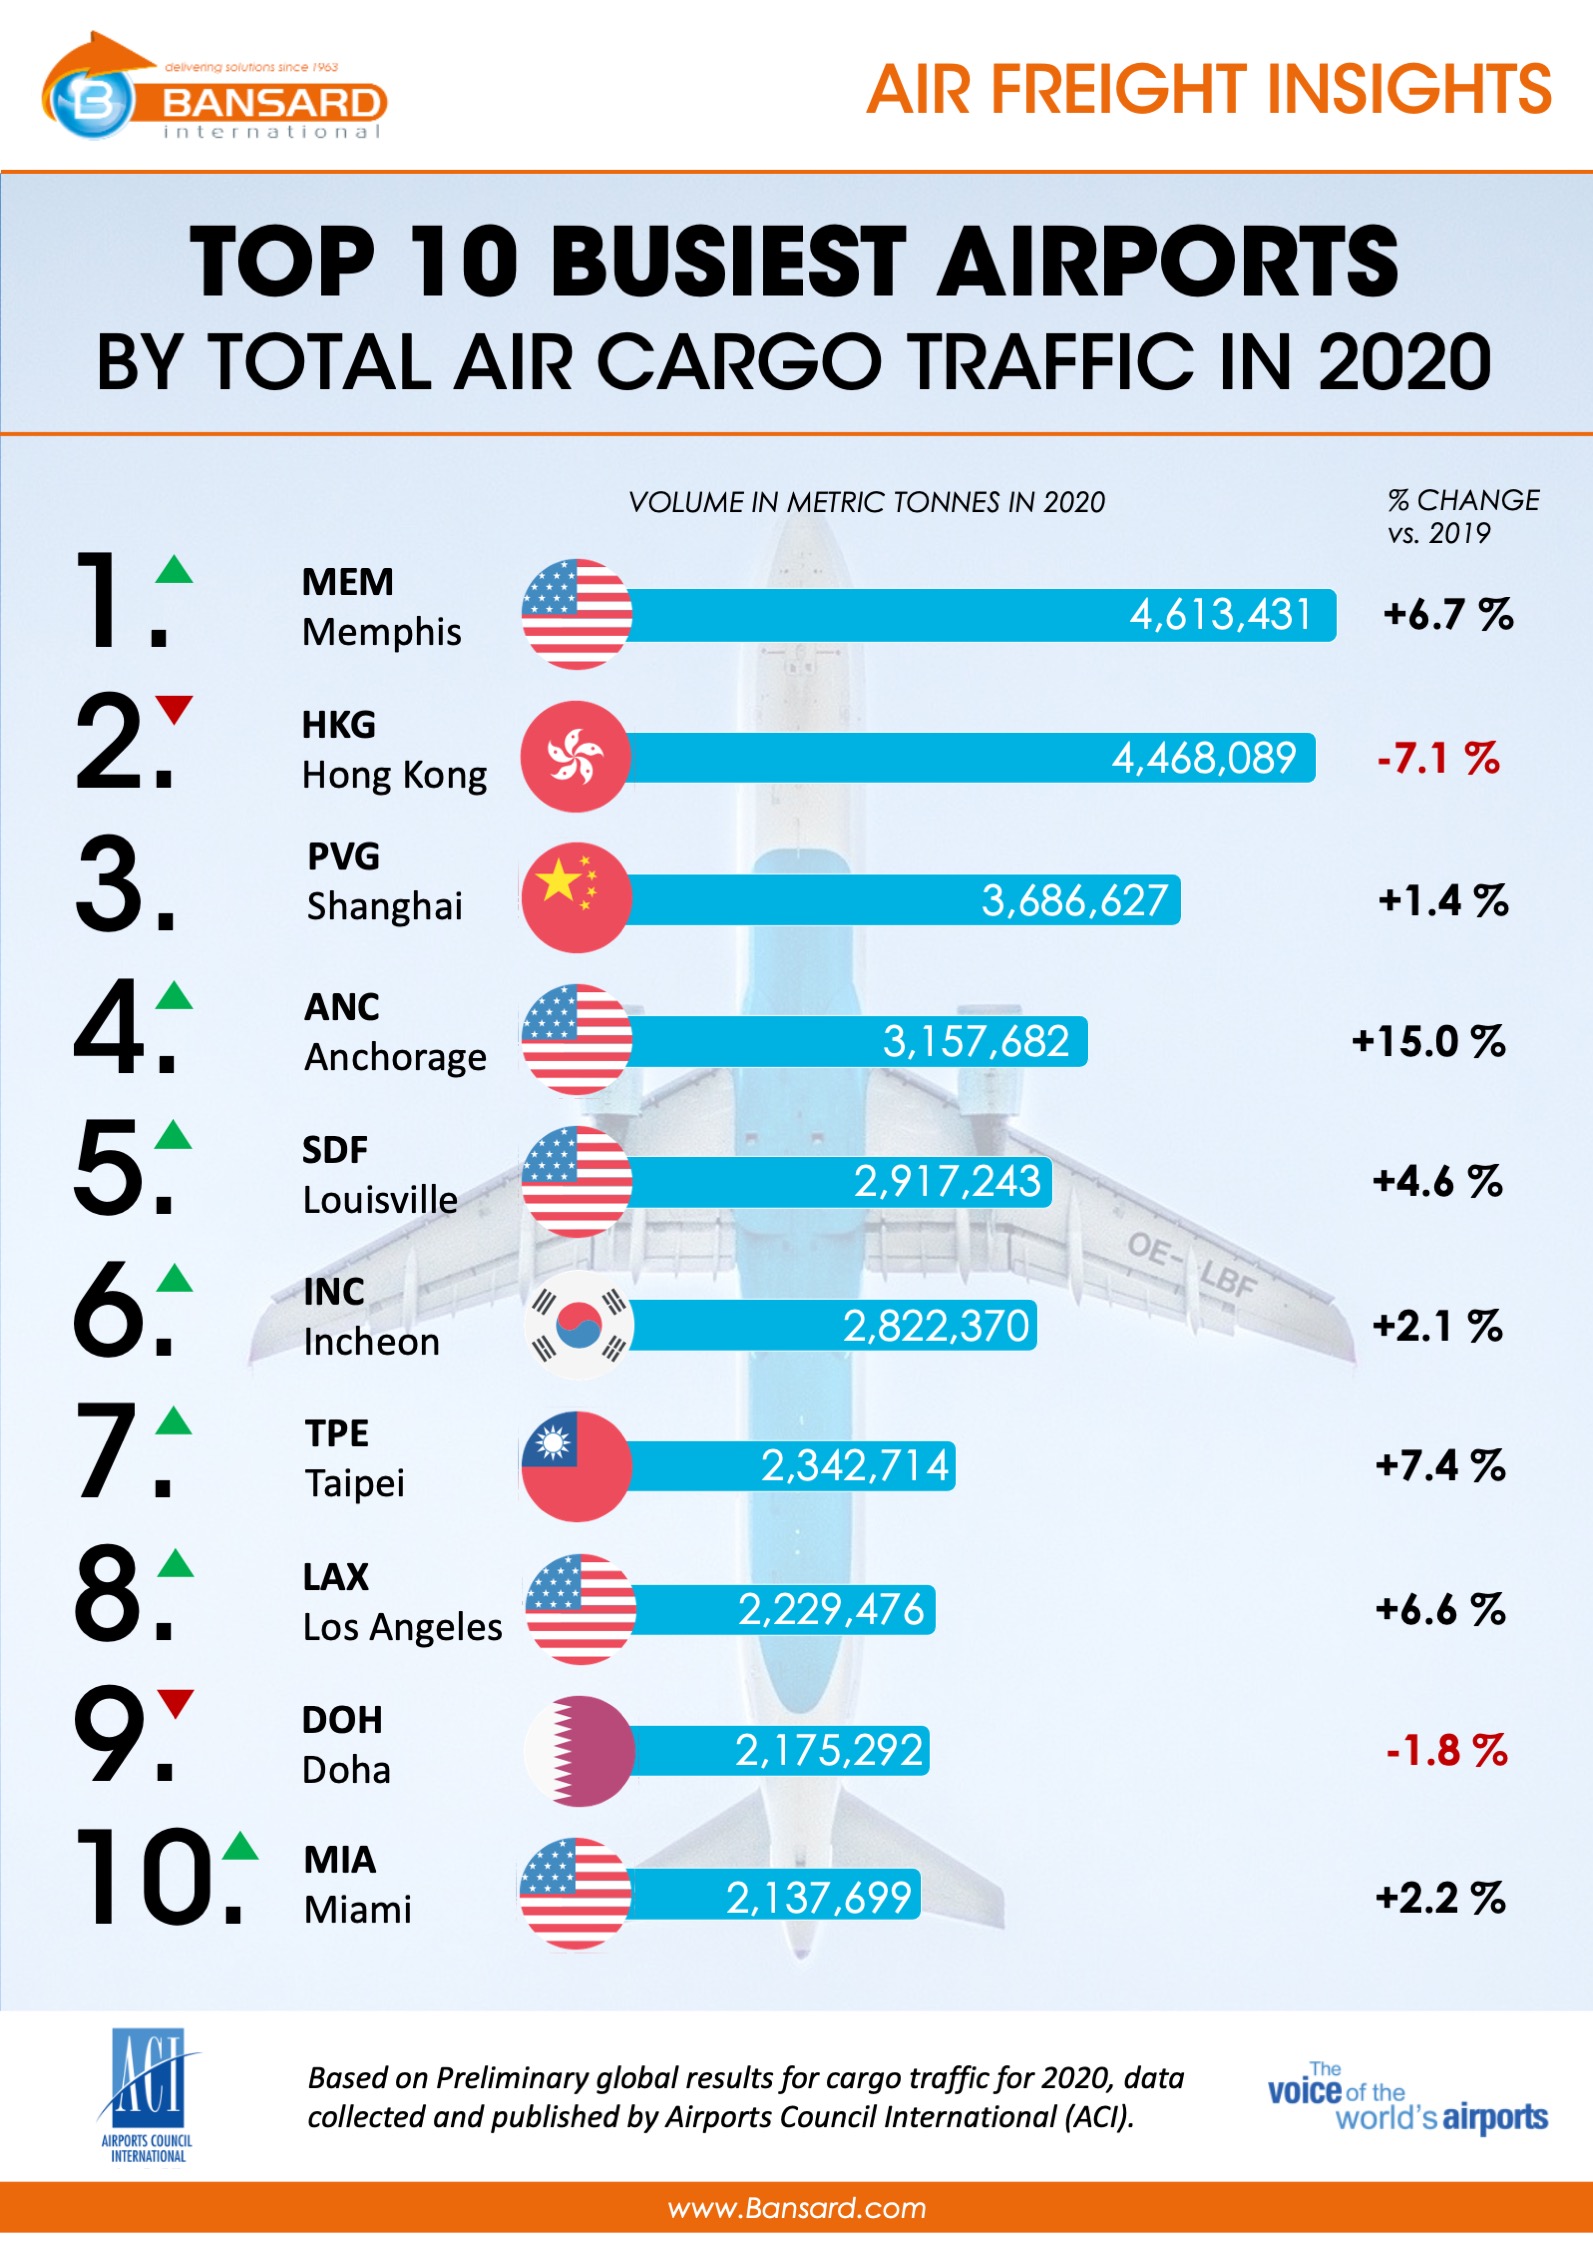 Top 10 busiest Air Cargo Airports